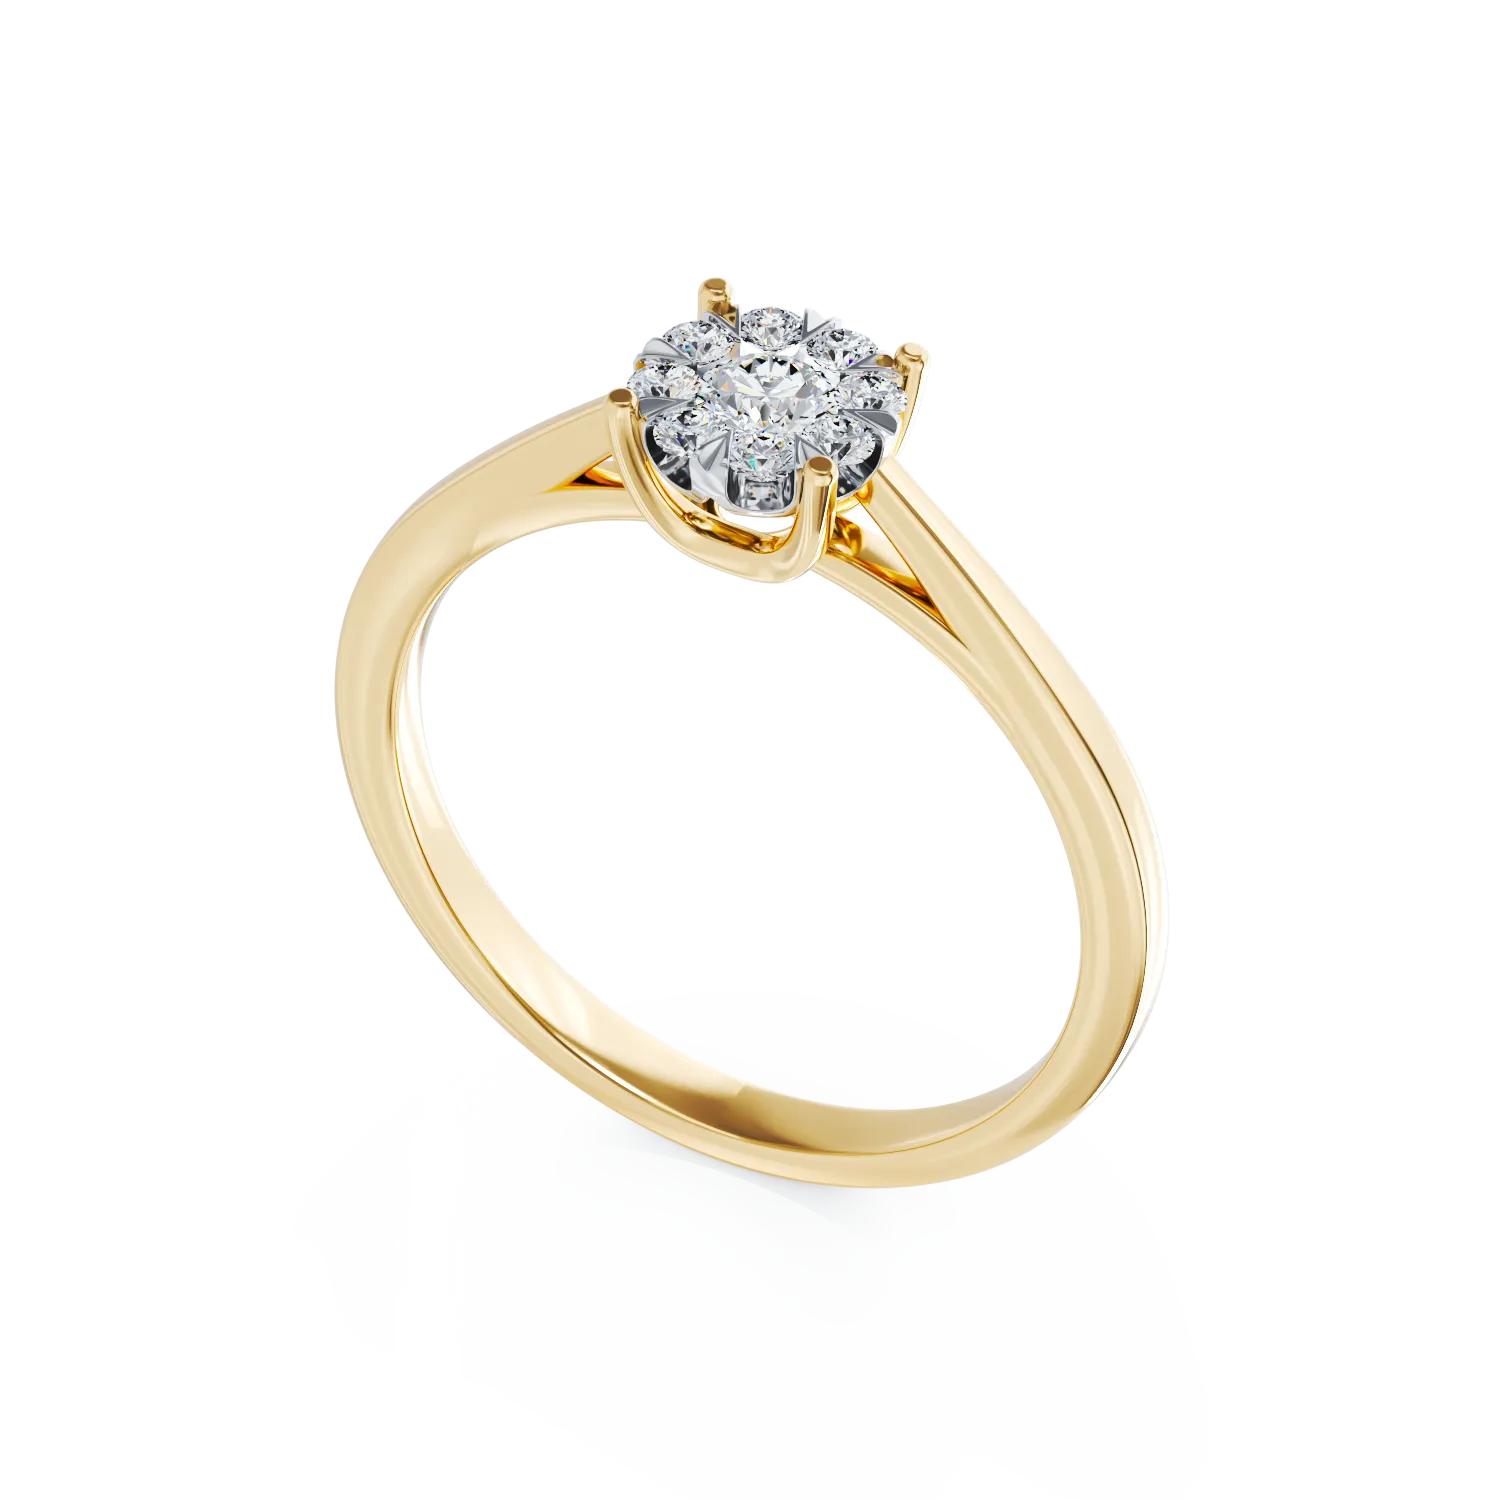 Yellow gold engagement ring with 0.15ct diamonds